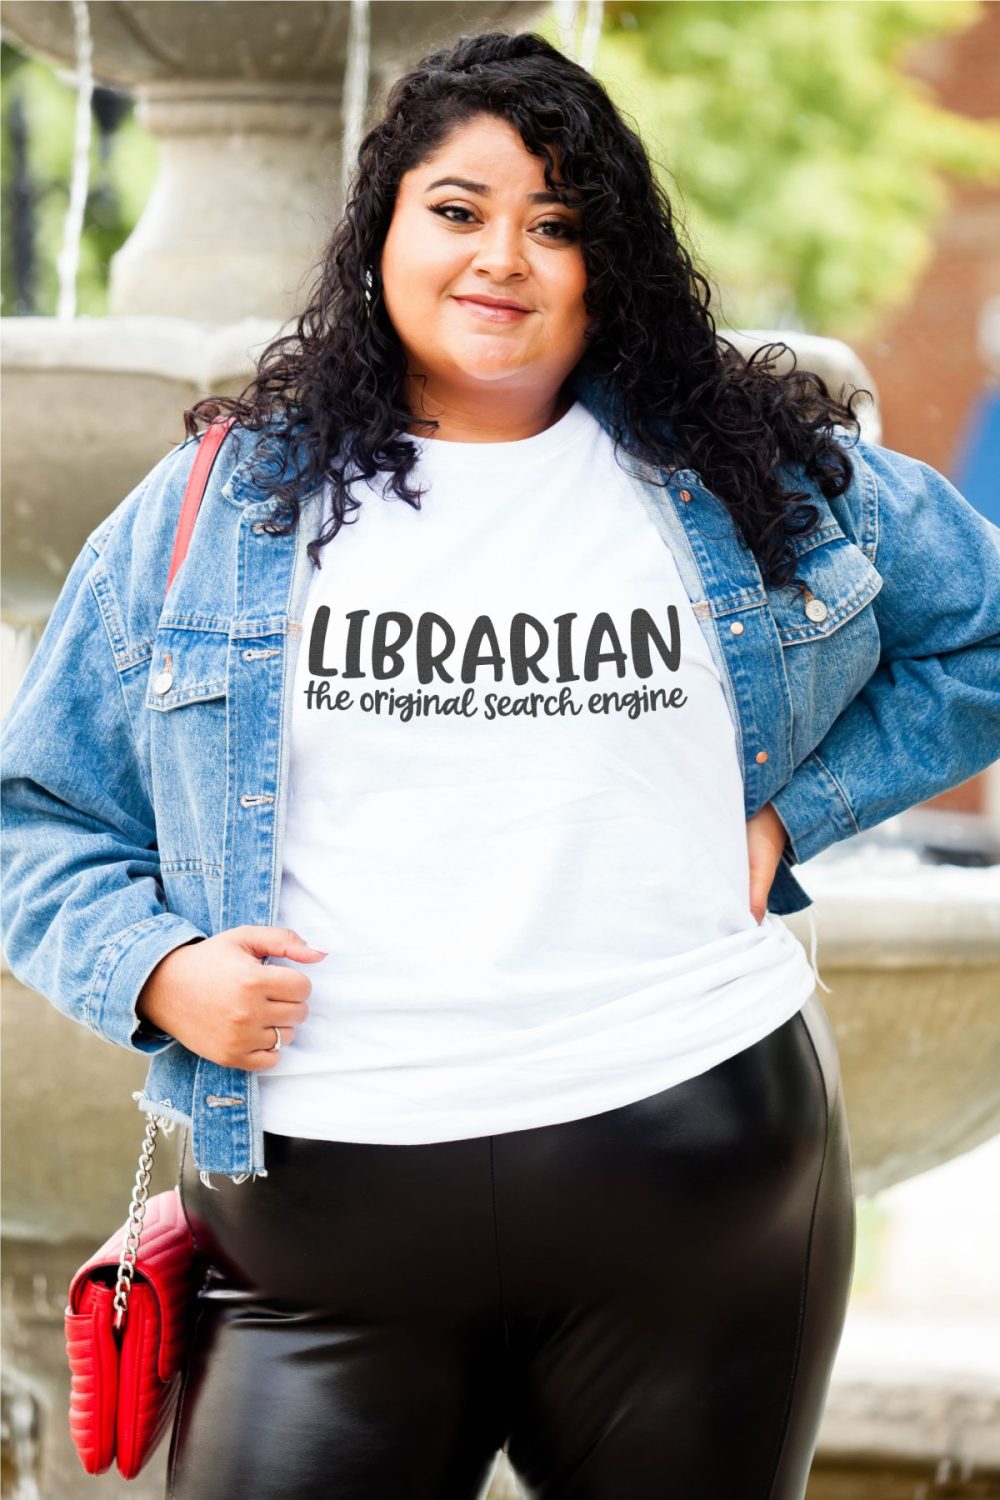 Latina plus size model with white shirt that says "librarian: the original search engine" and a jean jacket